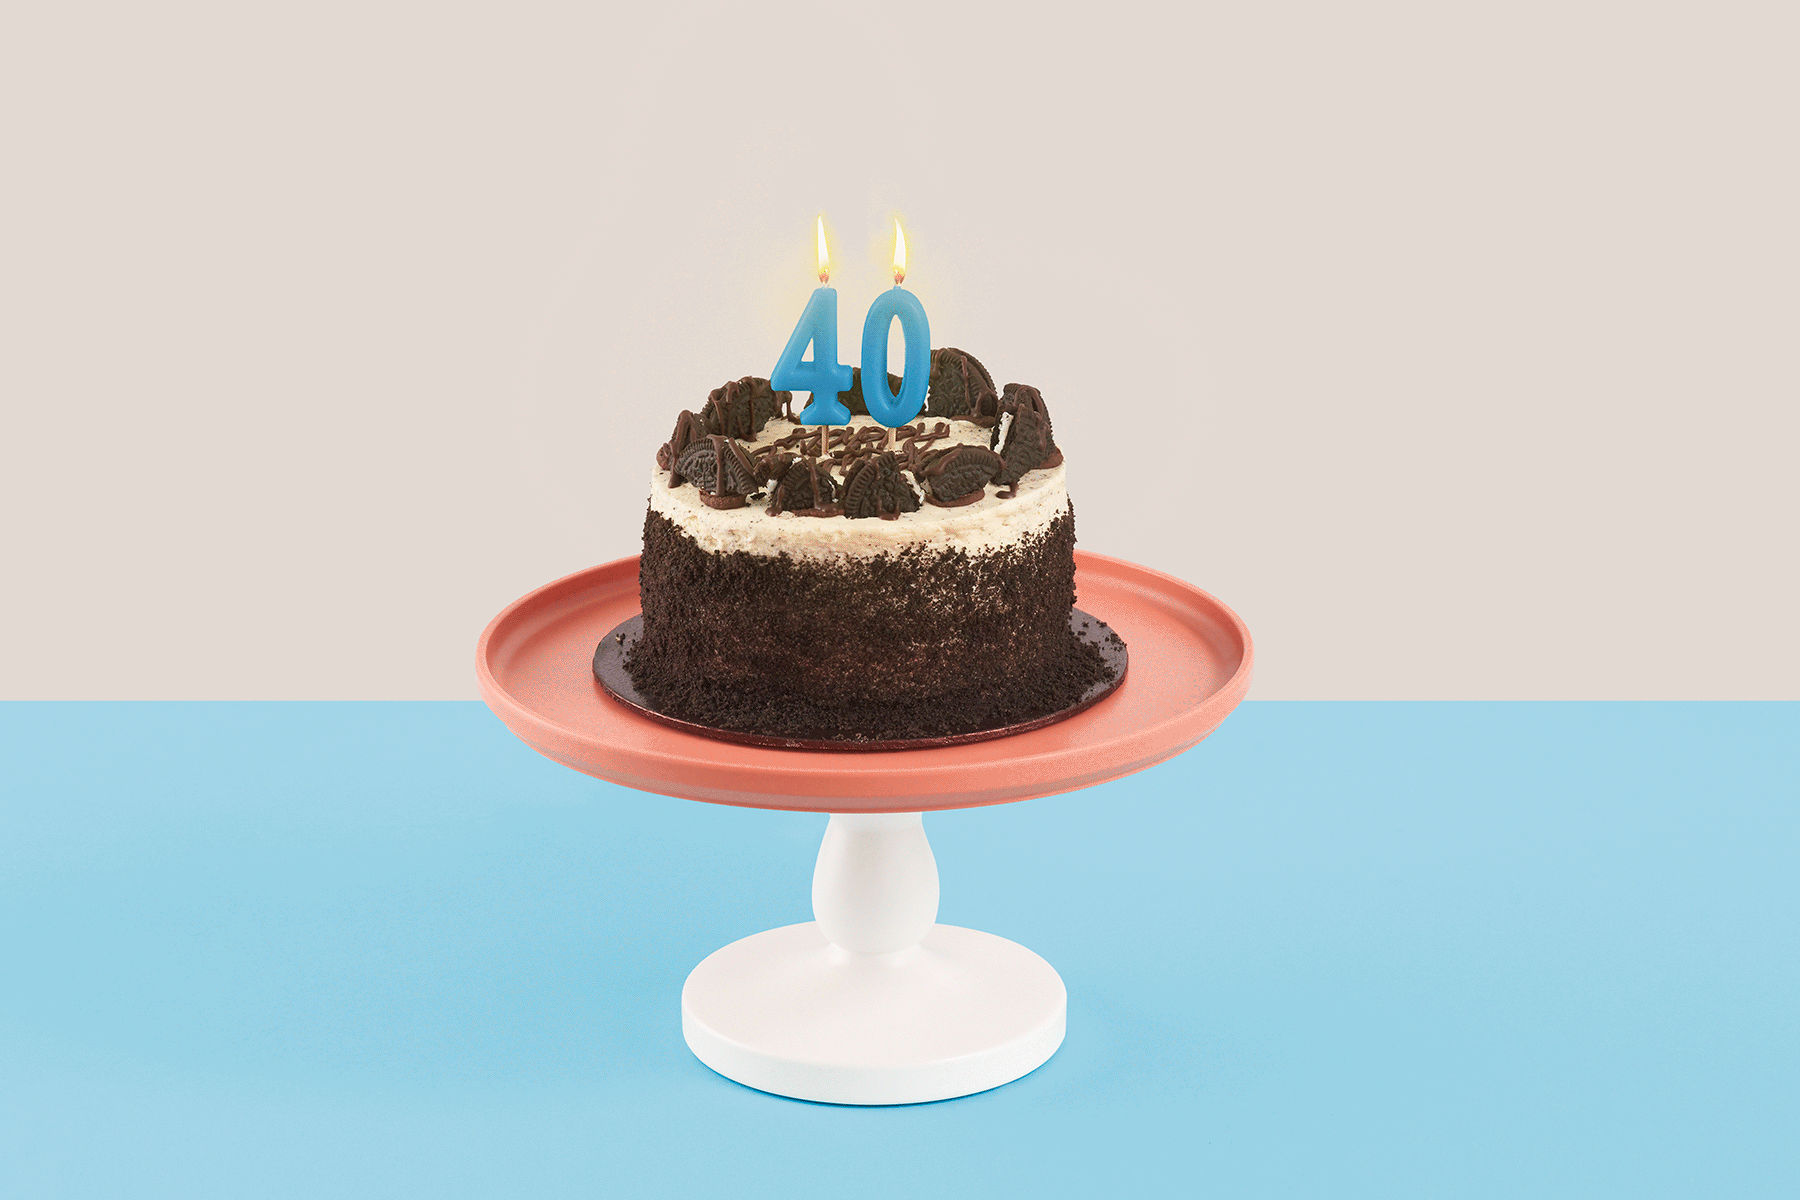 A gif of a birthday cake with '40' candles atop, with flickering flames.